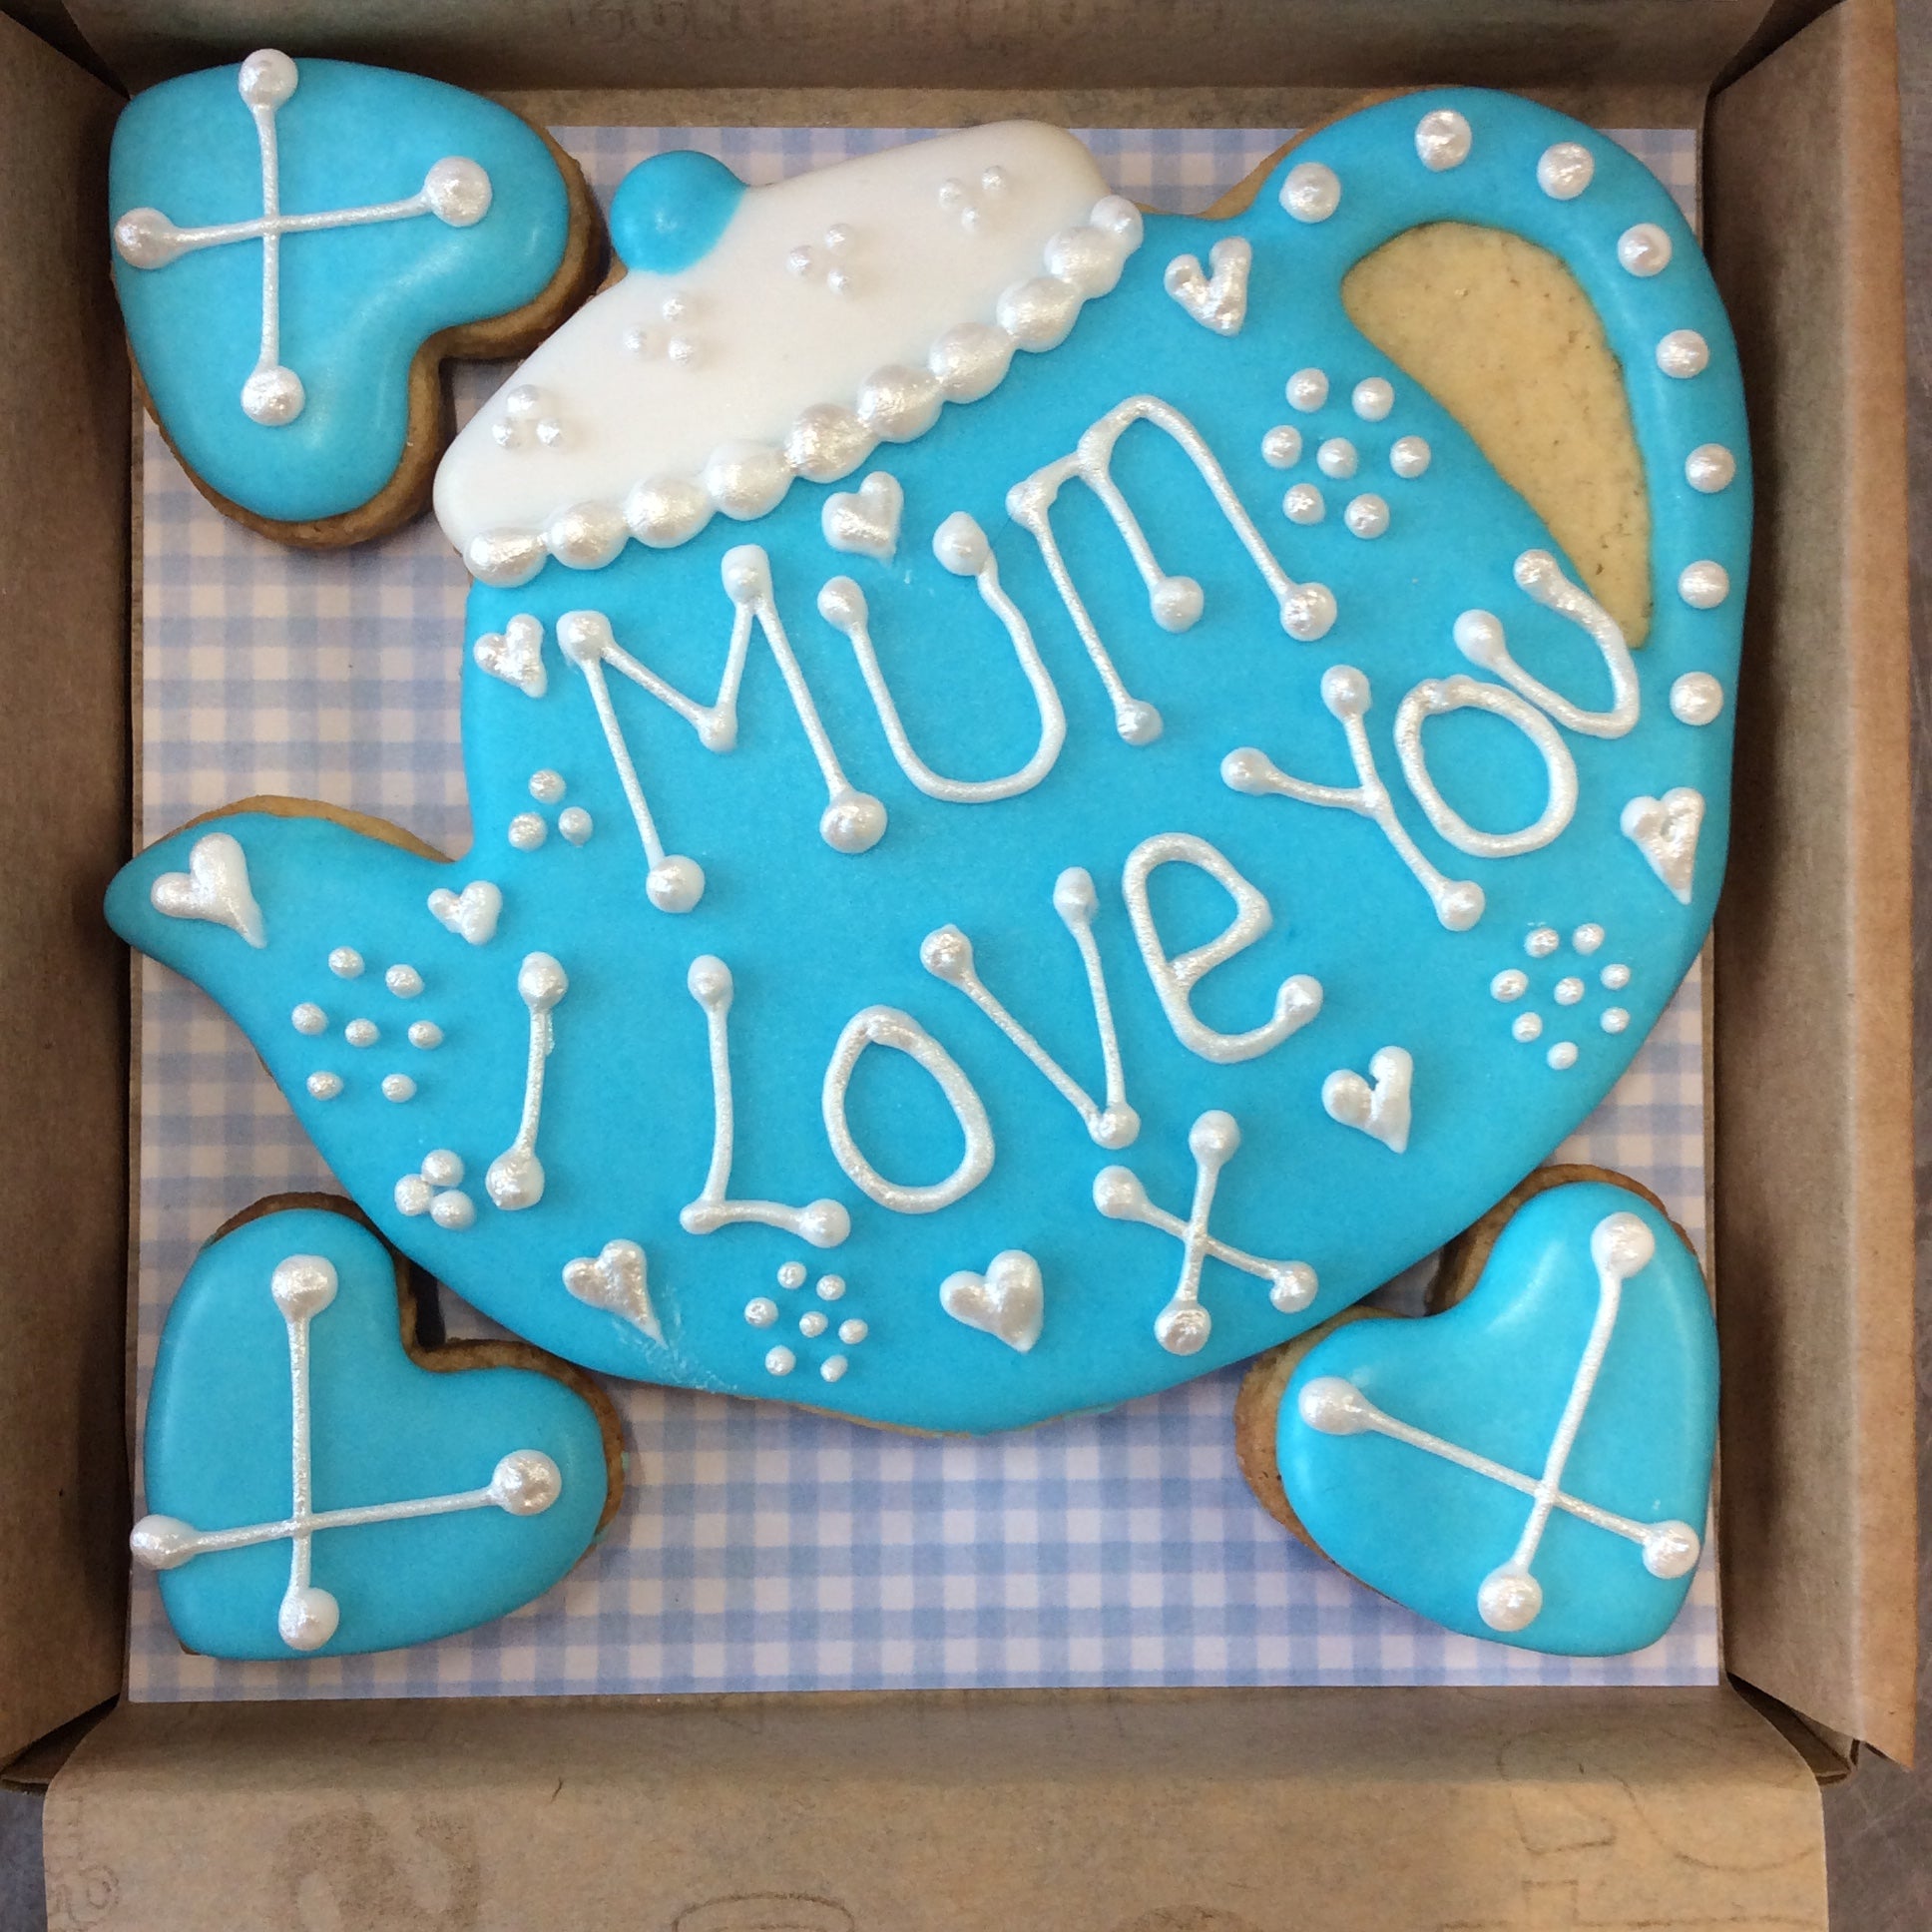 Mothers Day / Mothering Sunday / Mum Teapot Cookie Box